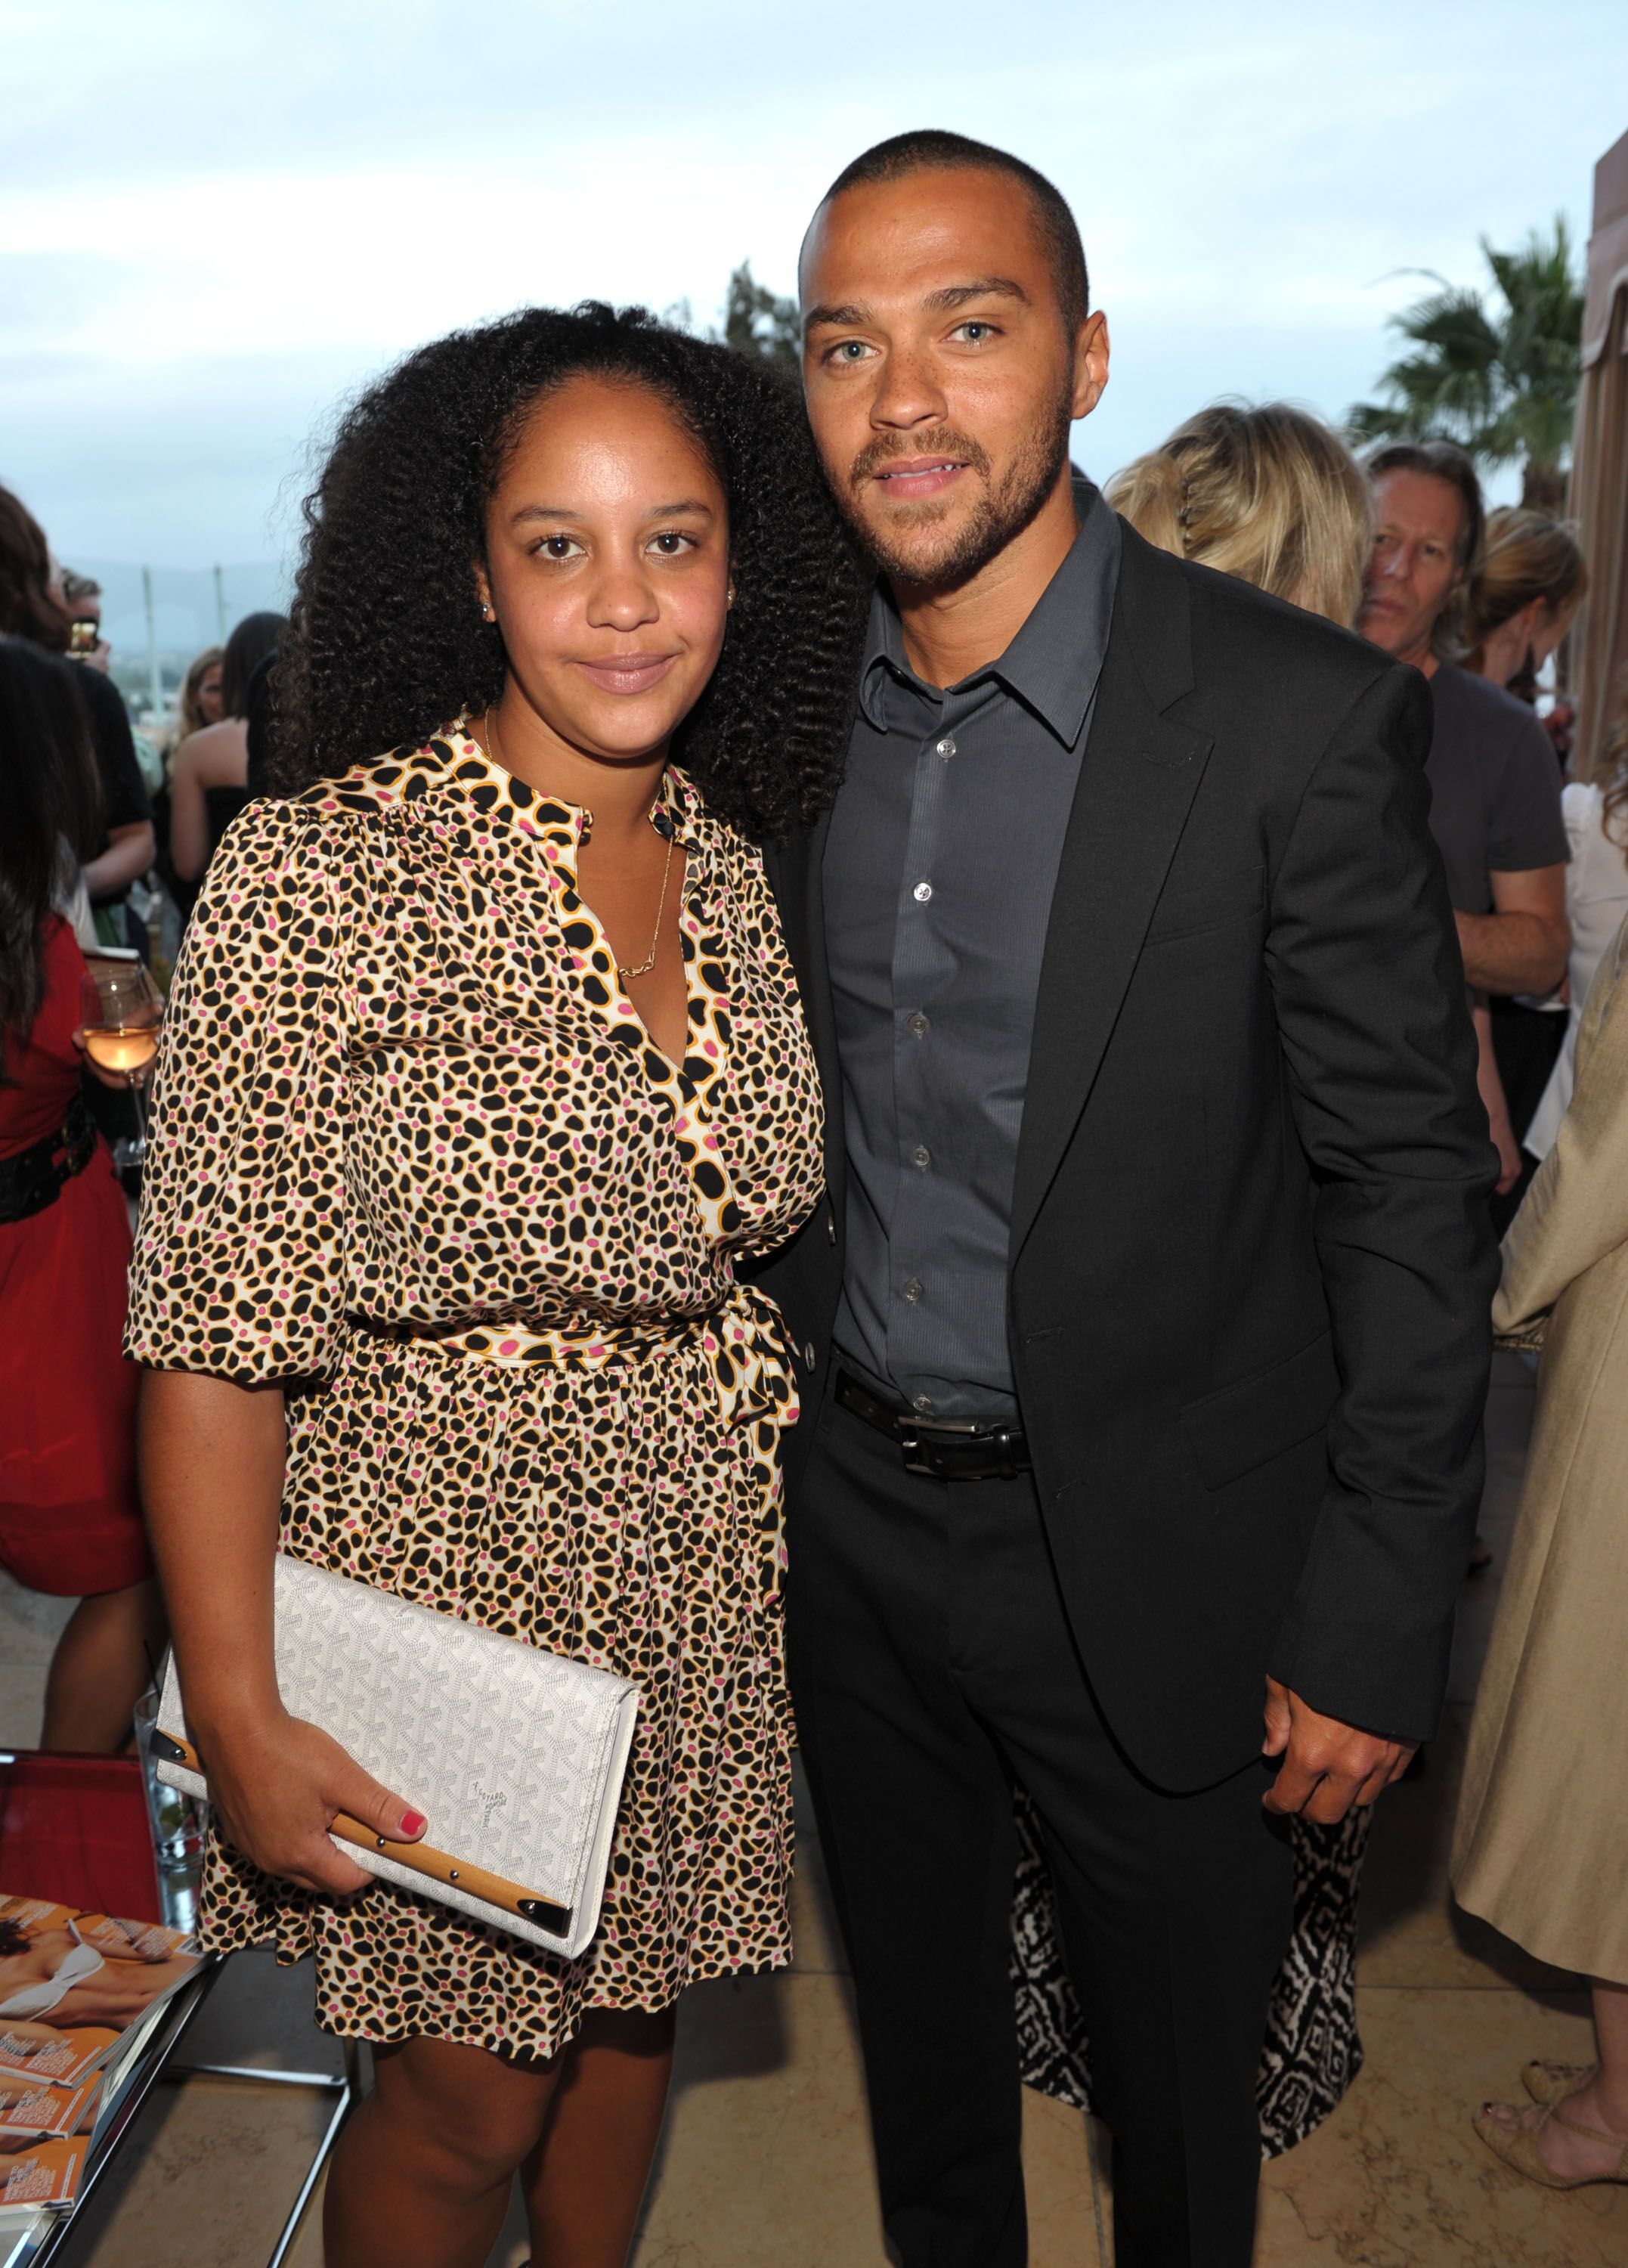 Jesse Williams and his ex-wife Aryn Drake-Lee/ Source: Getty Images